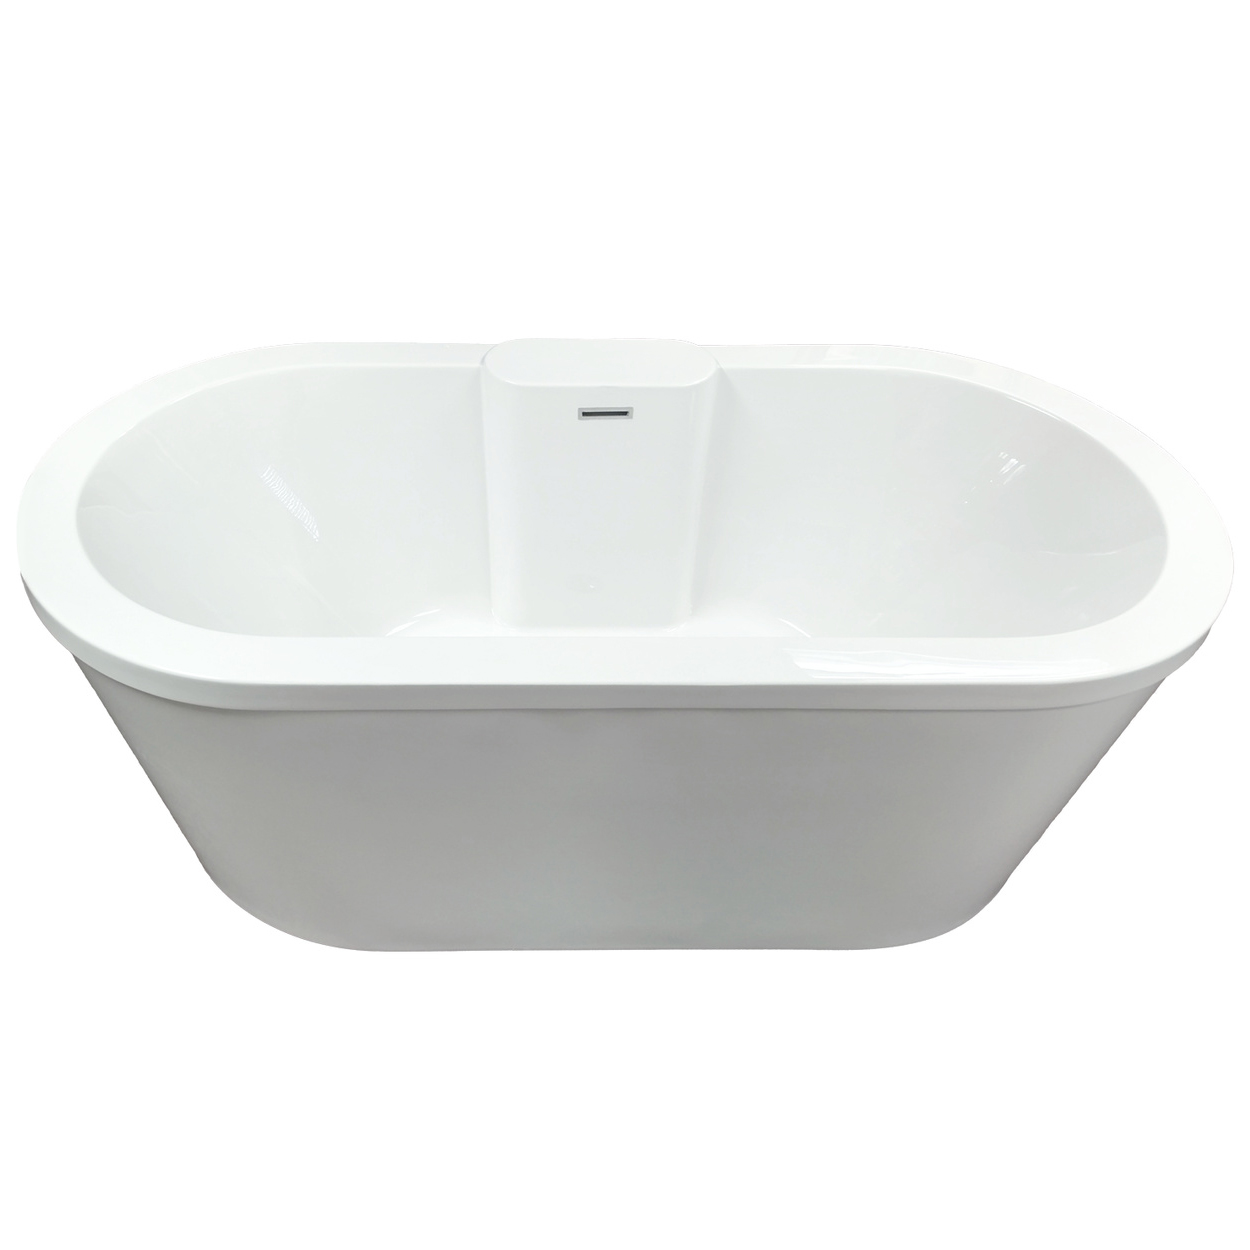 Hydro Systems Eveline 6632 Freestanding Tub EVE6632AT